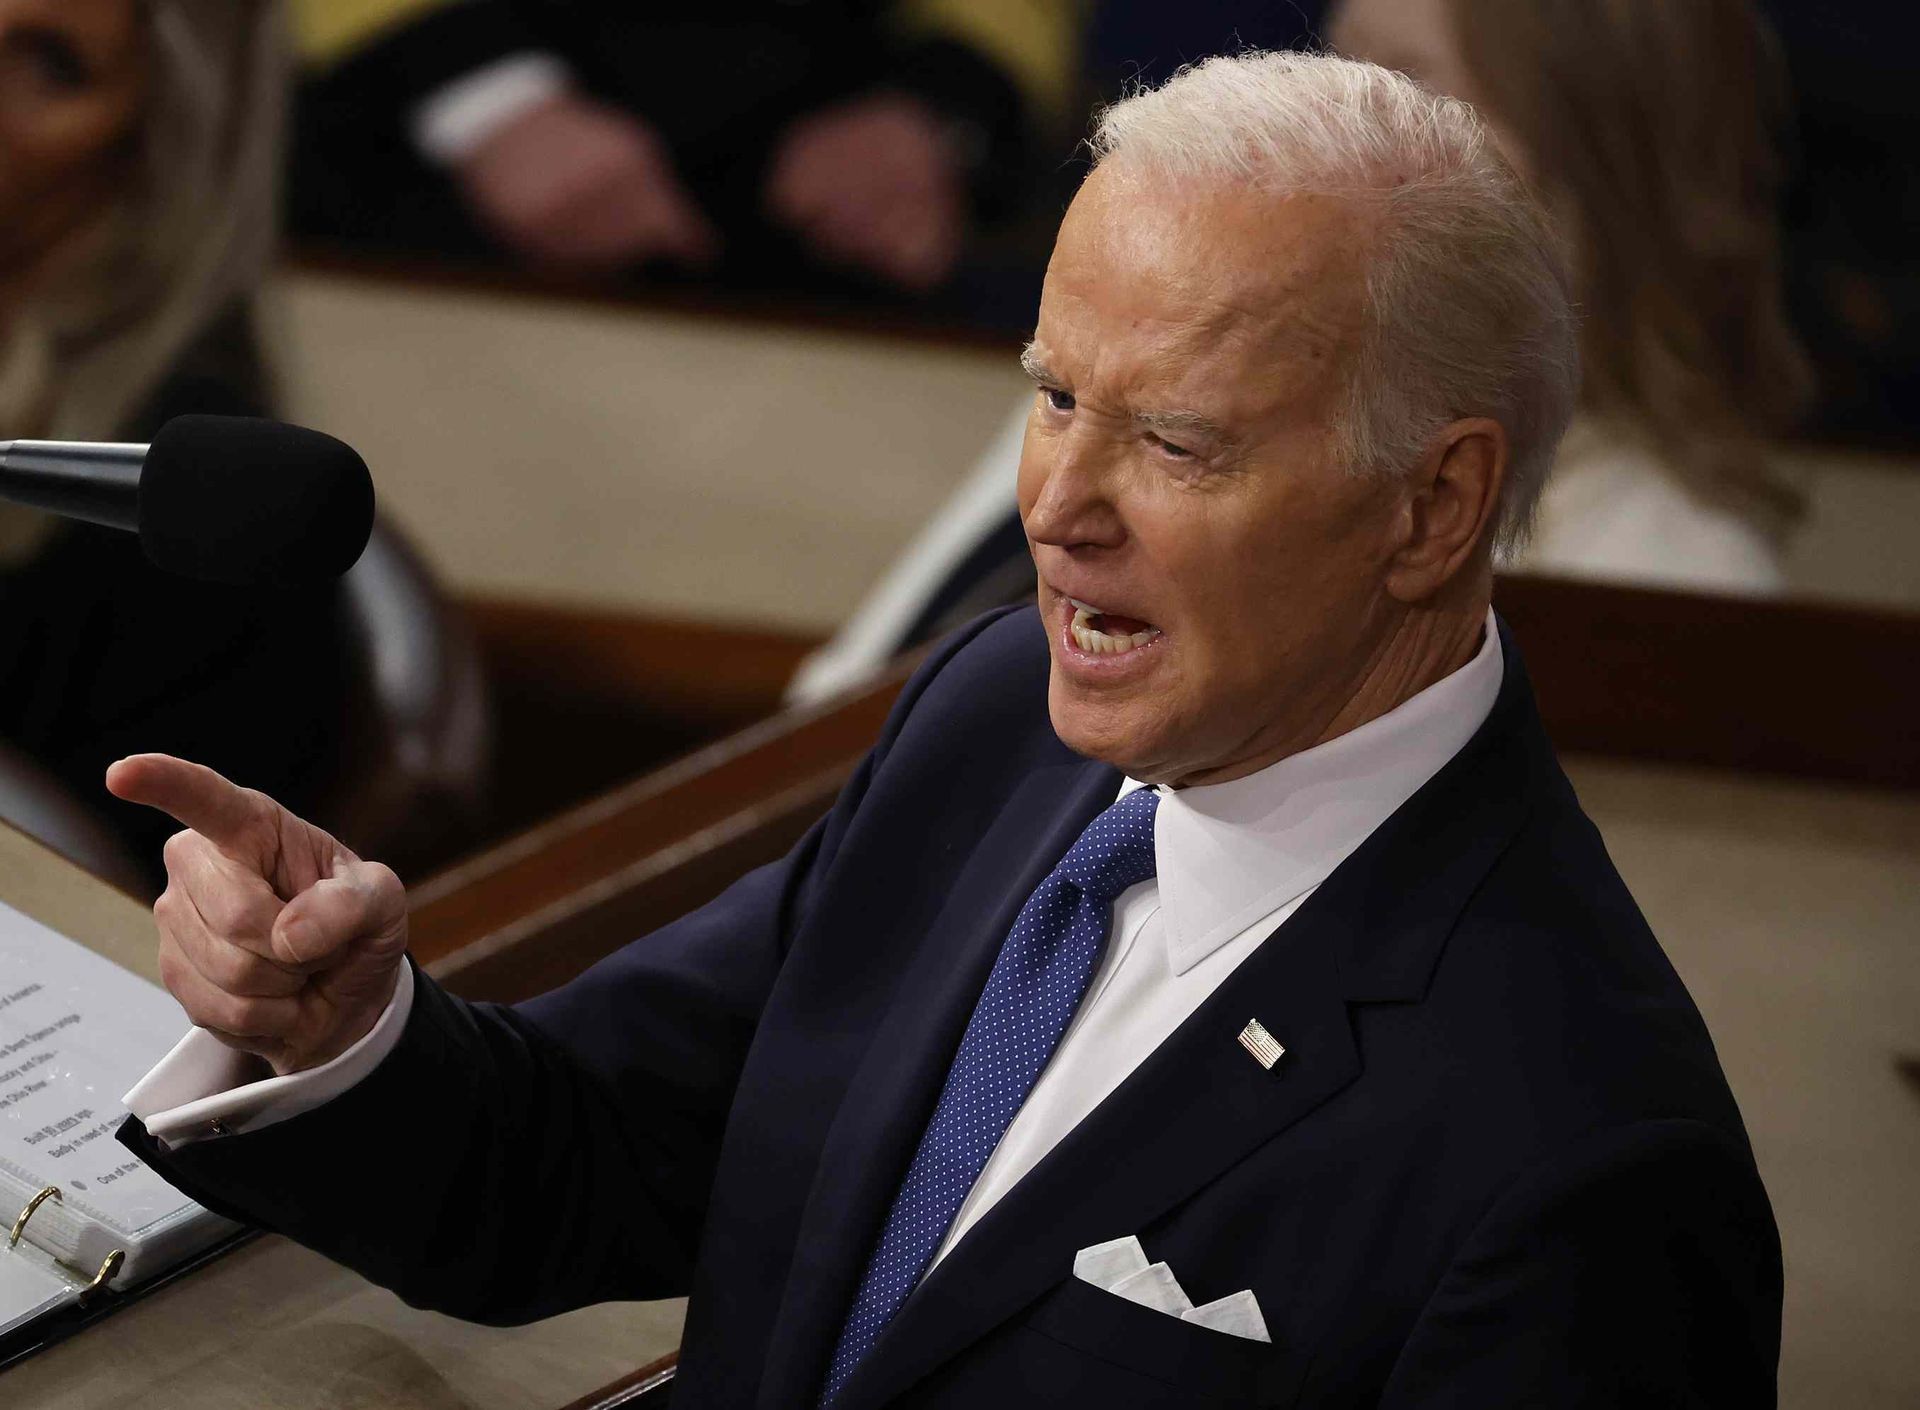 Joe Biden proposes crypto taxation changes in new budget plan